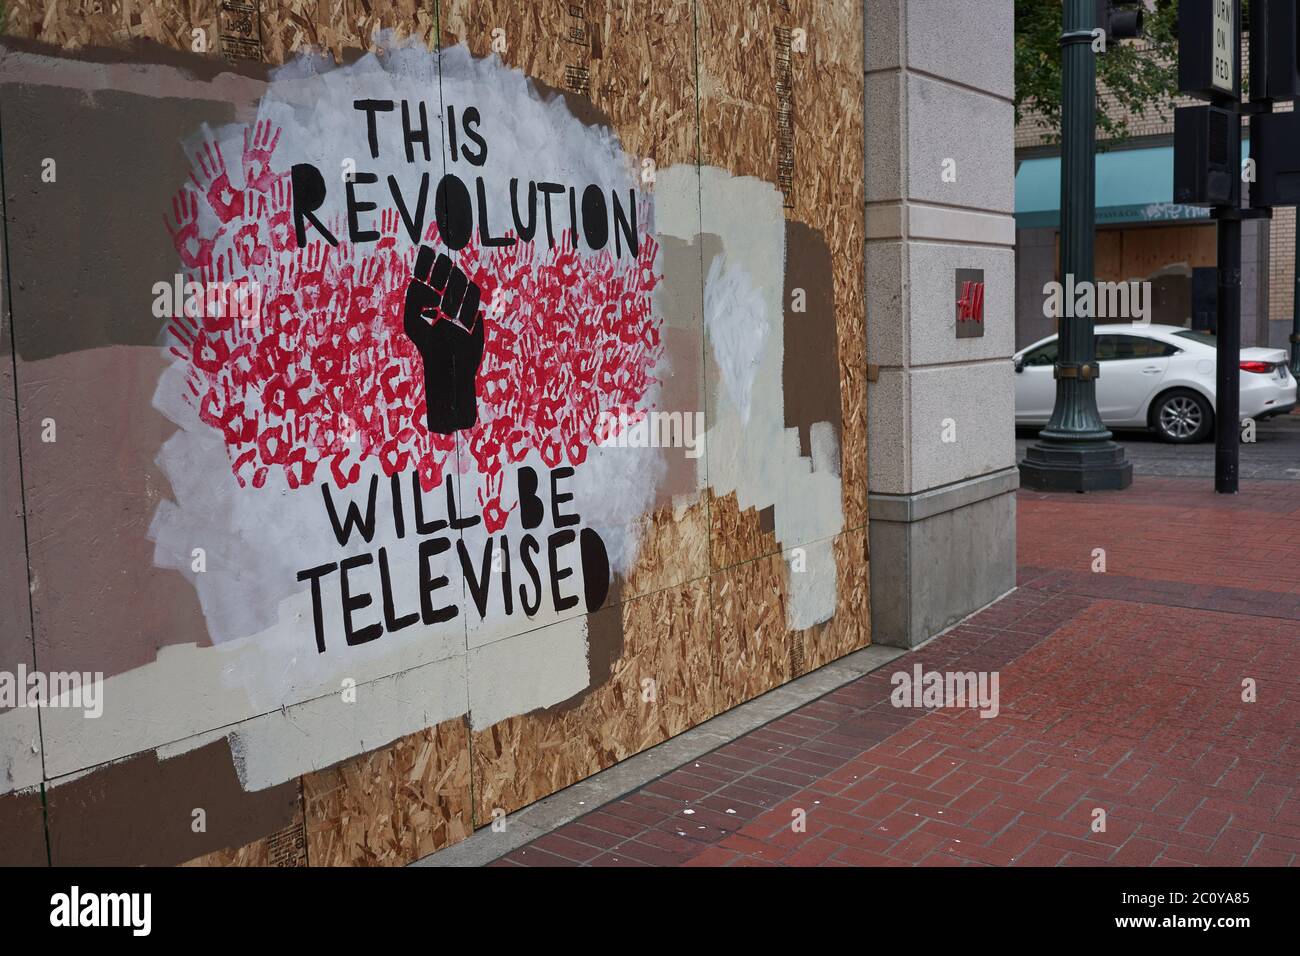 The boarded-up H&M store in downtown Portland, Oregon, which has become canvases for protest, seen on Friday, Jun 12, 2020. Stock Photo